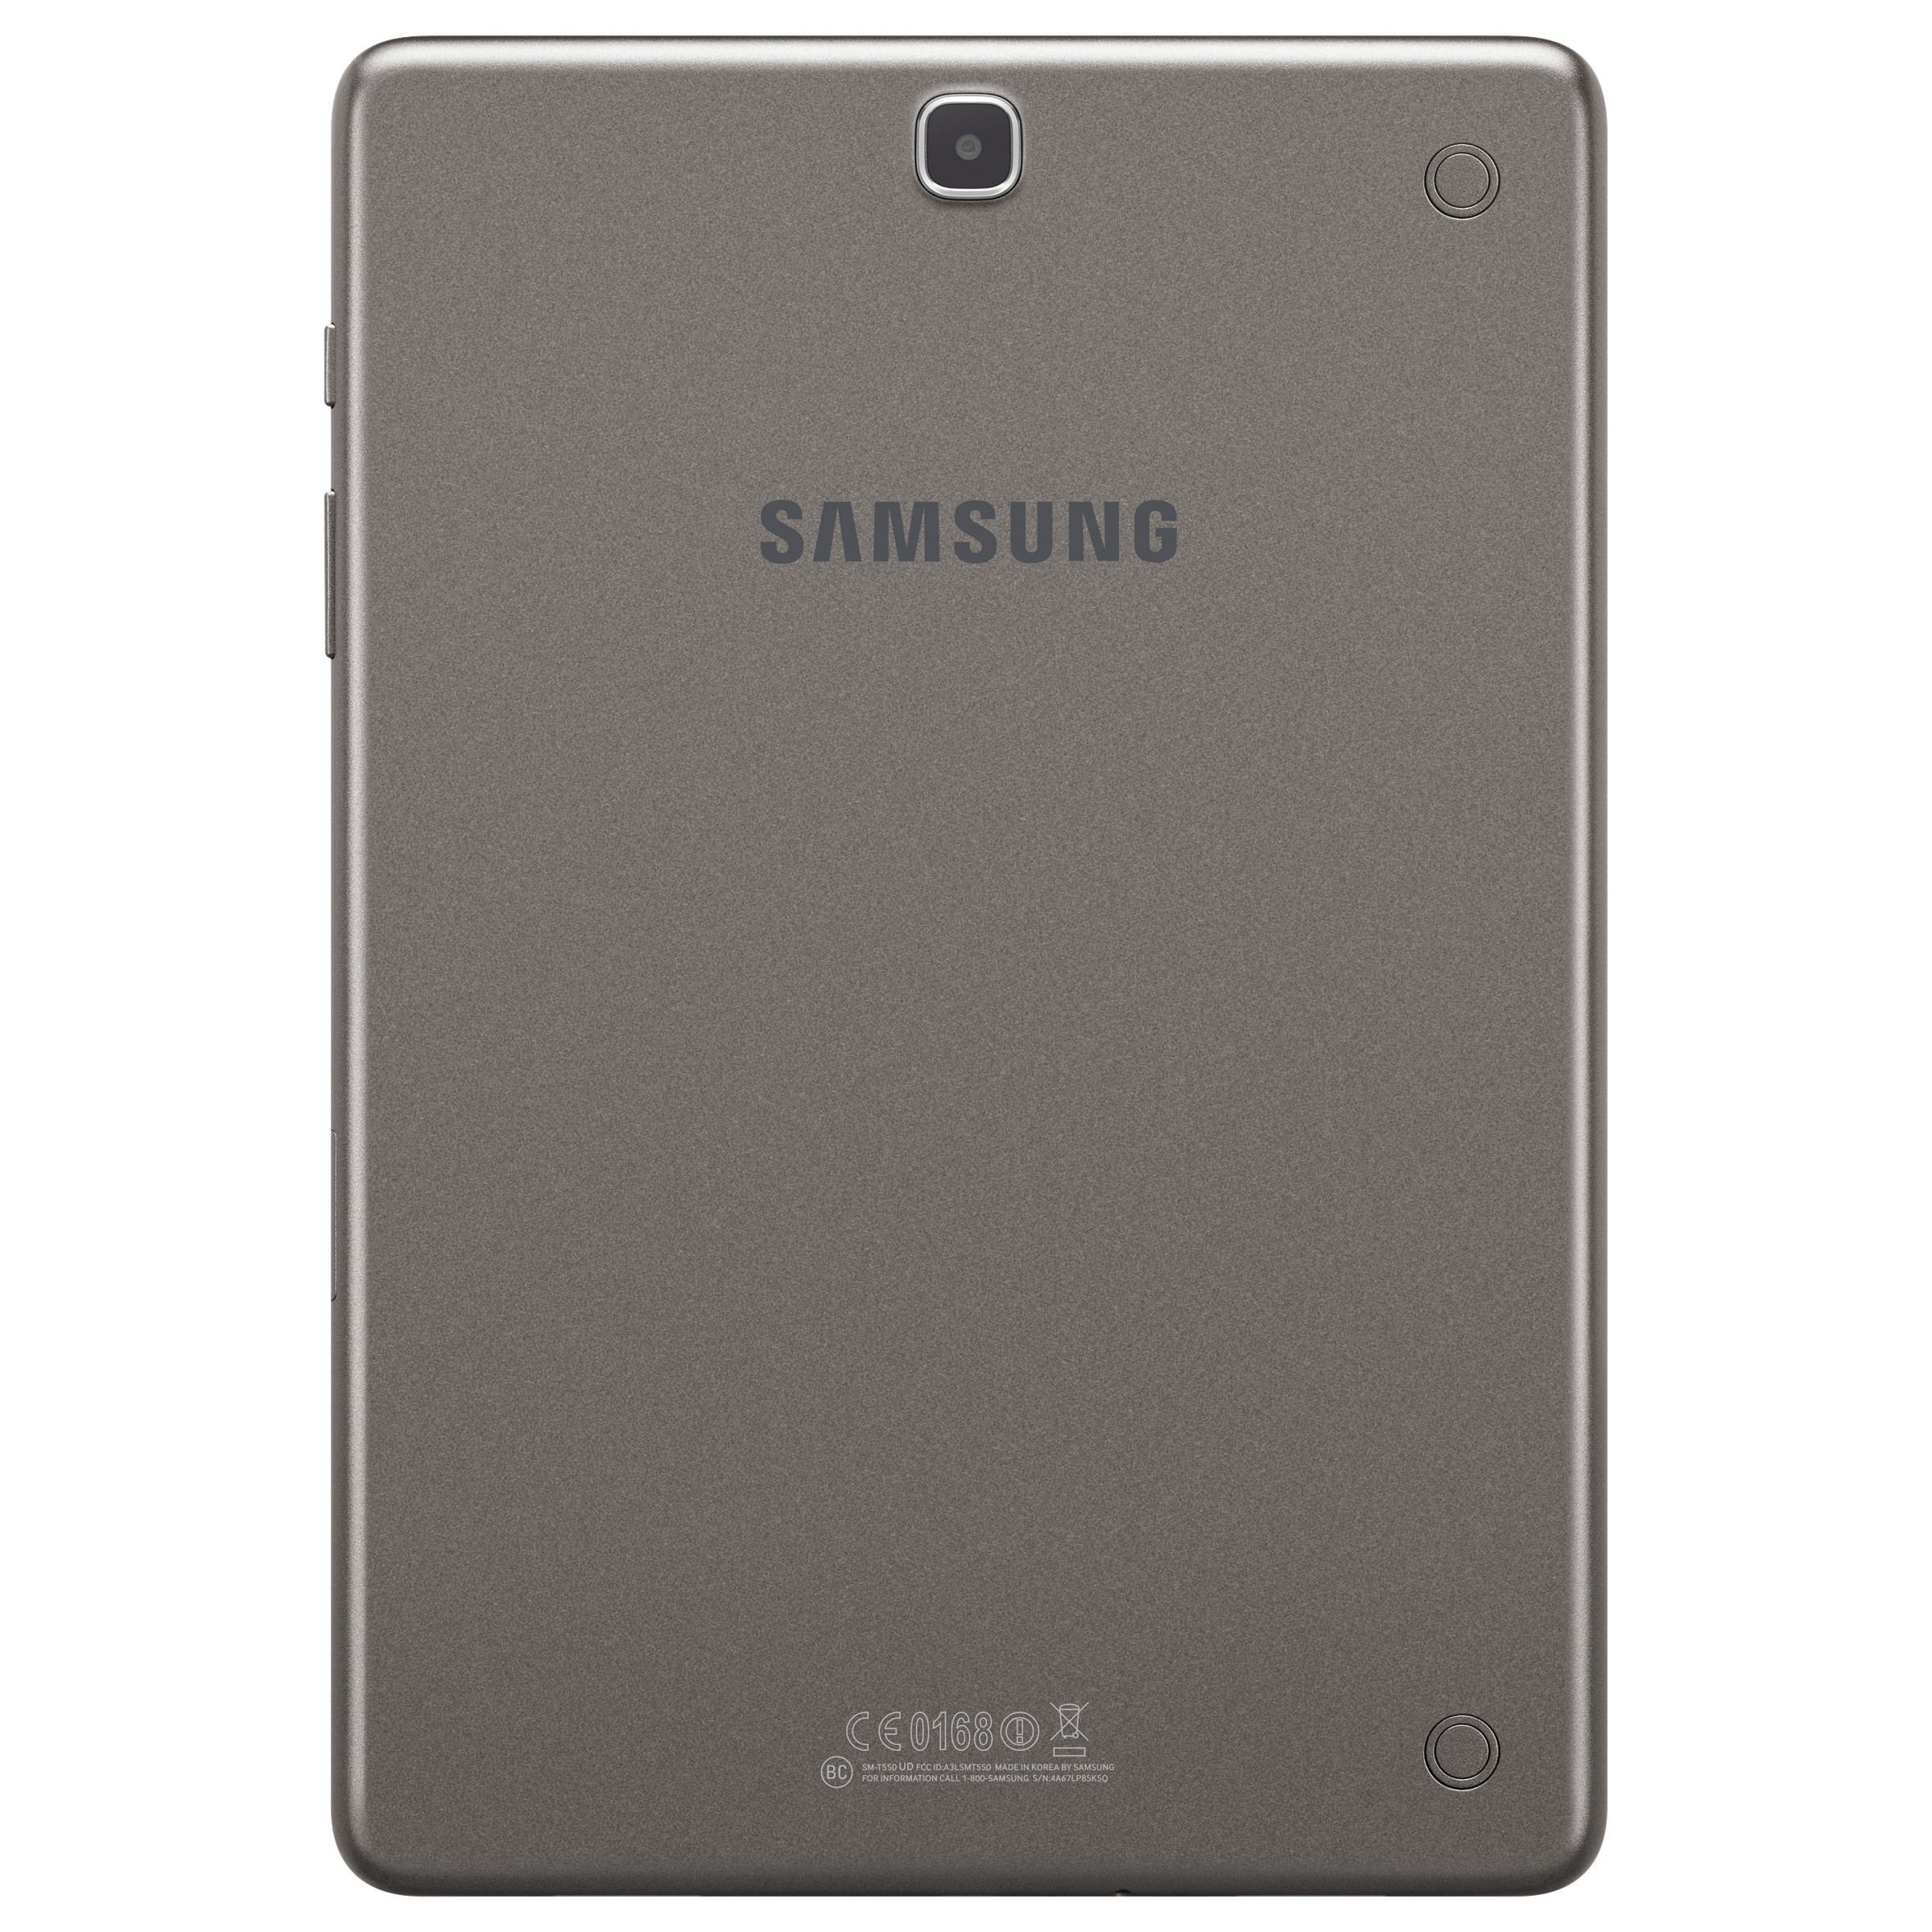 Samsung Galaxy Tab A - tablet - Android 5.0 (Lollipop) - 16 GB - 9.7" - image 3 of 4